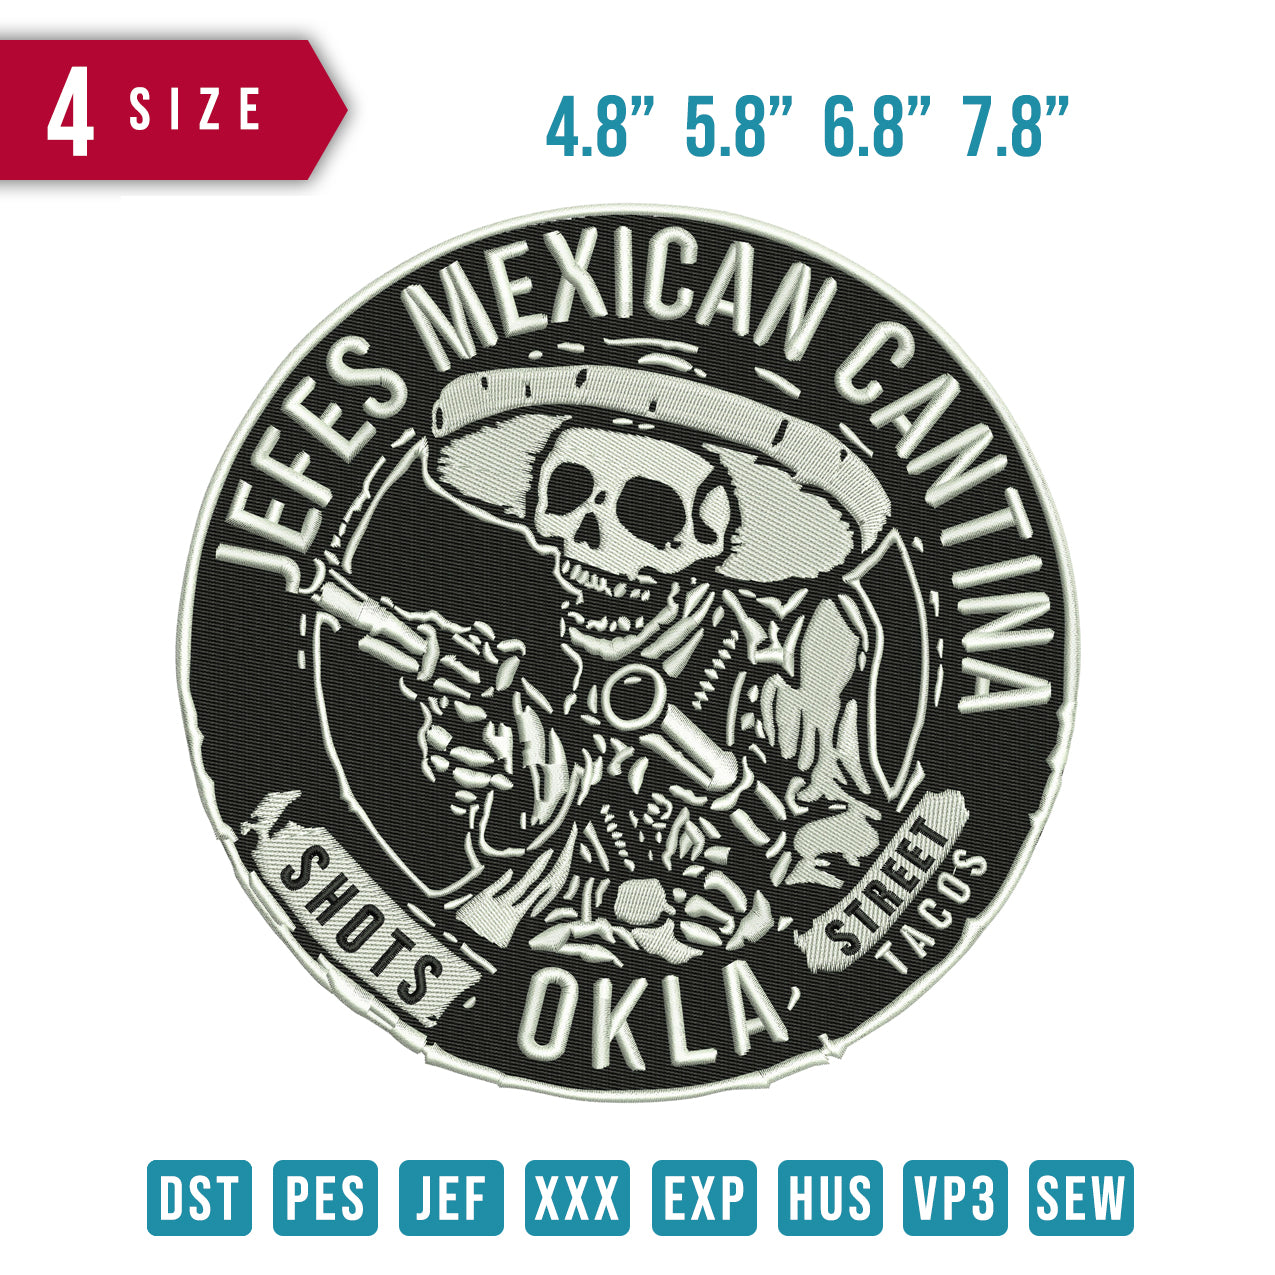 Jefes Mexican